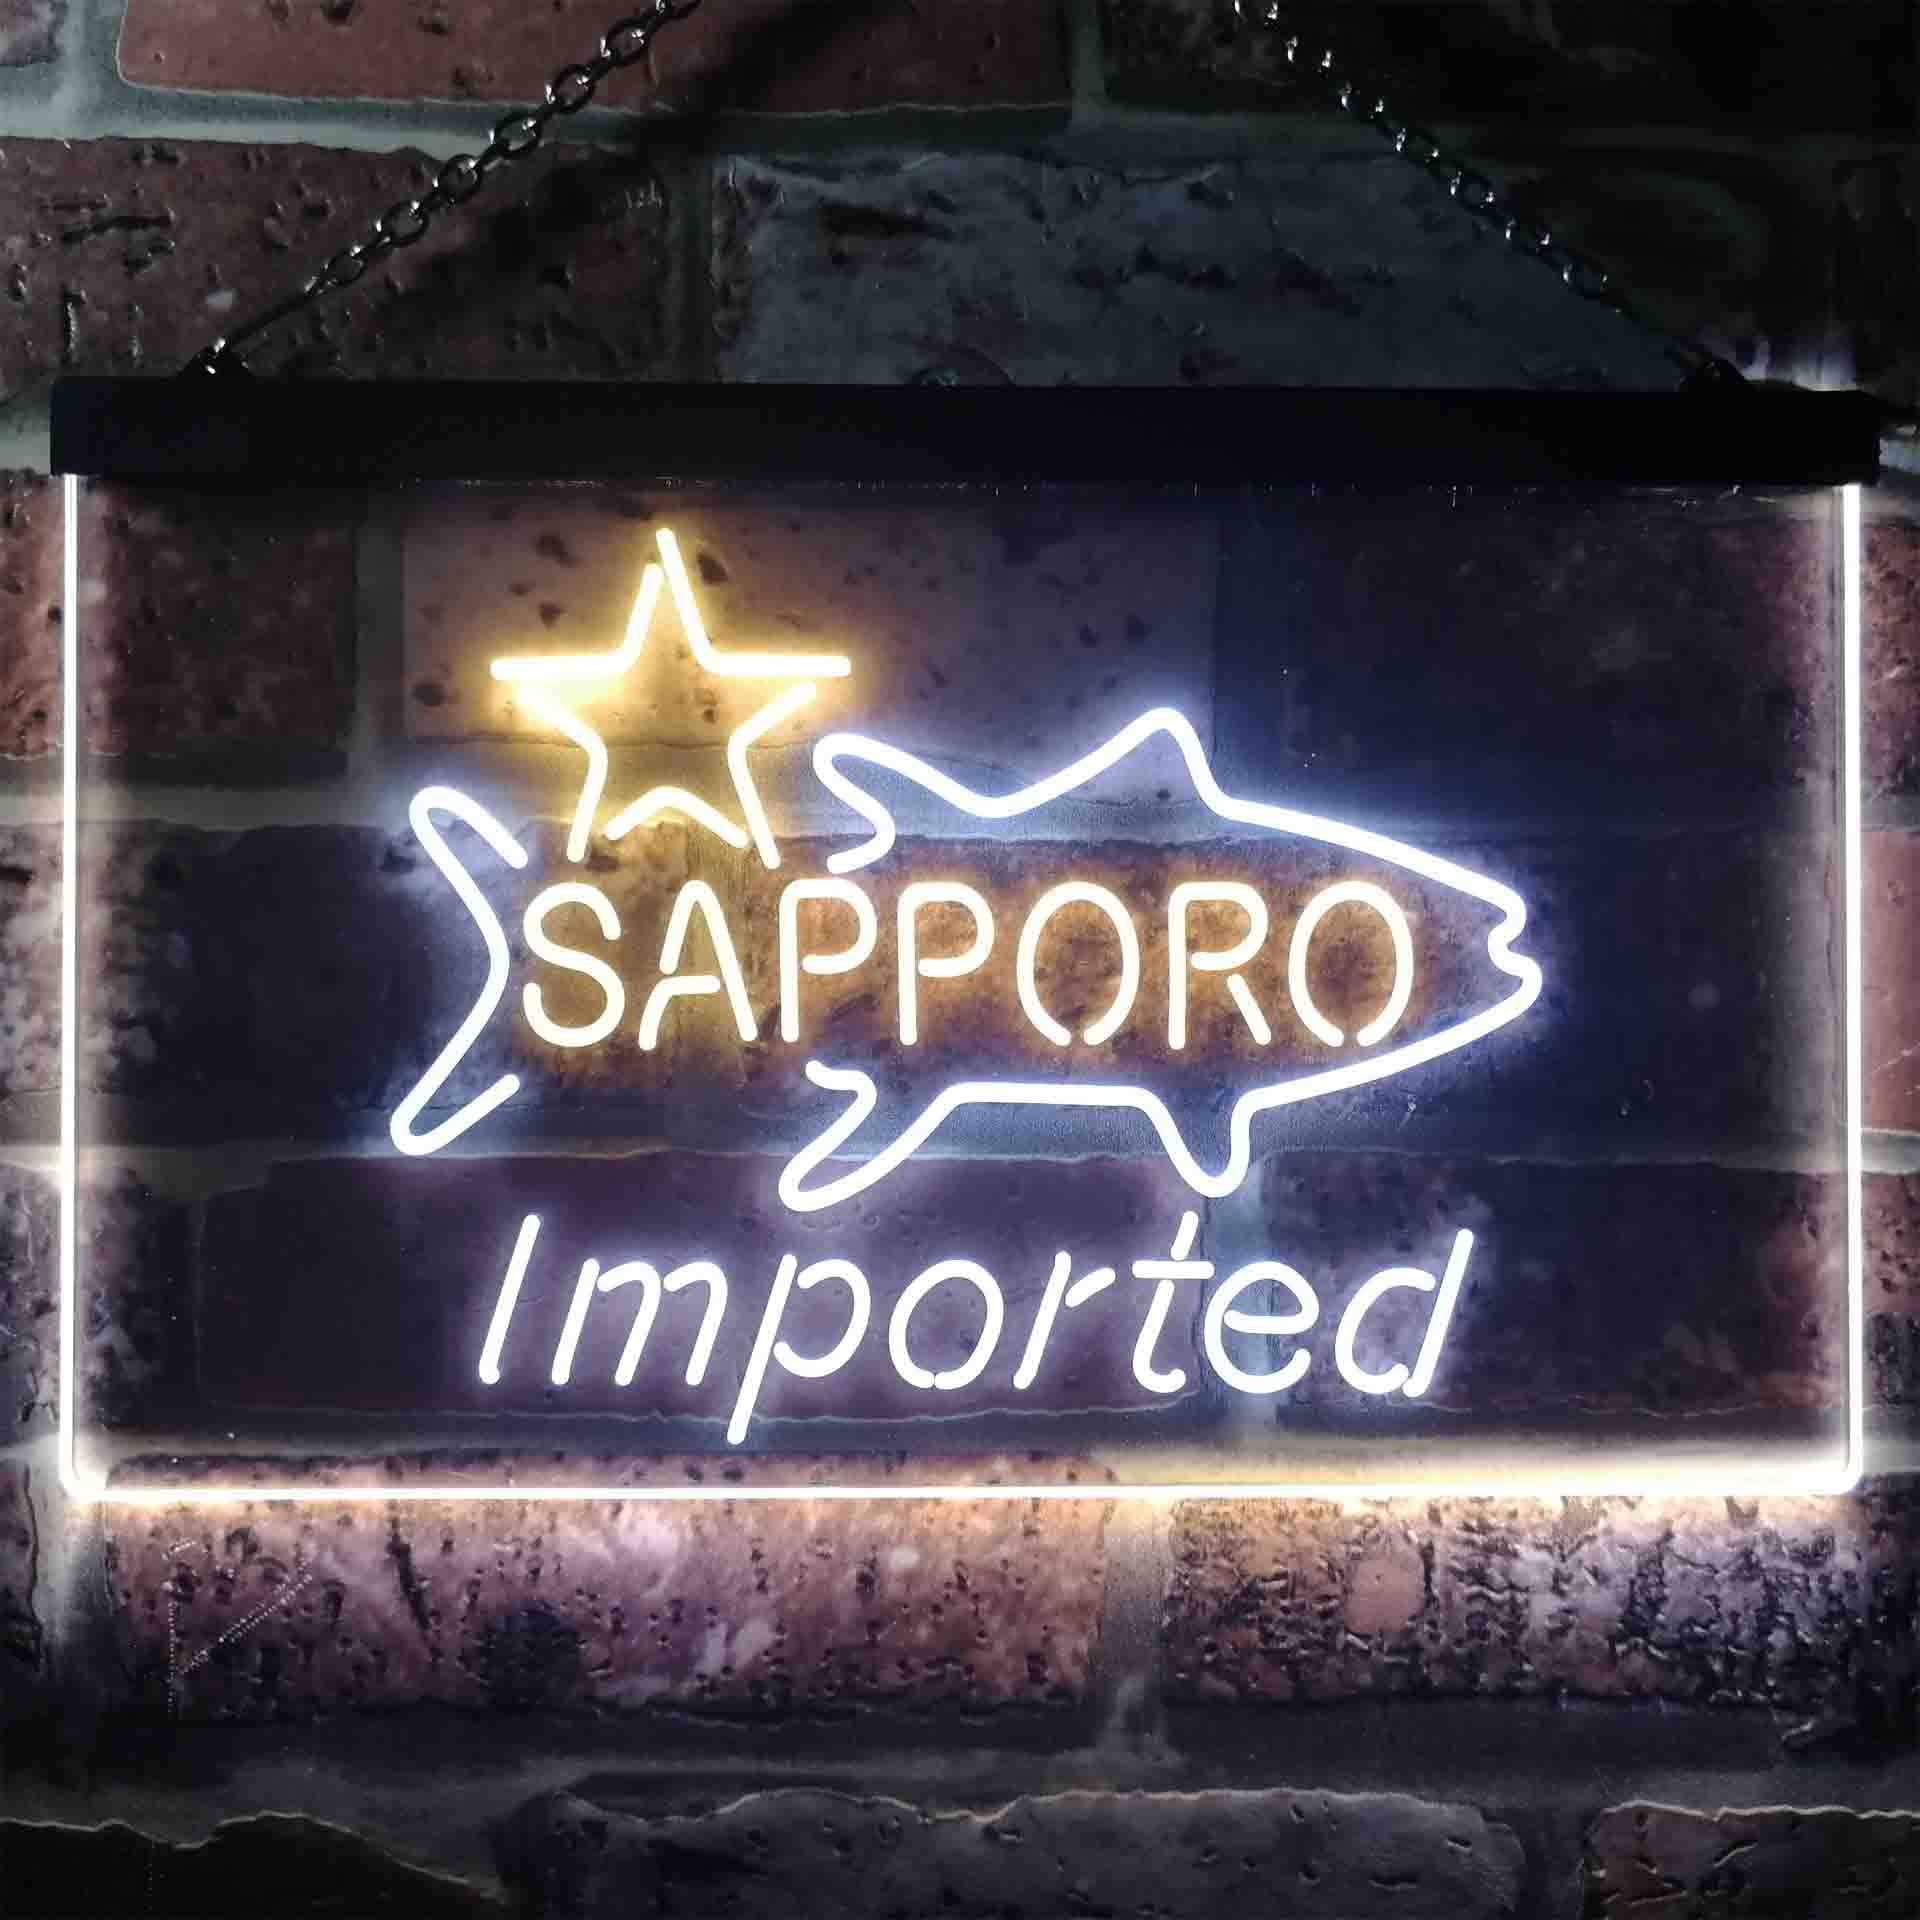 Sapporo Beer Bar LED Neon Sign